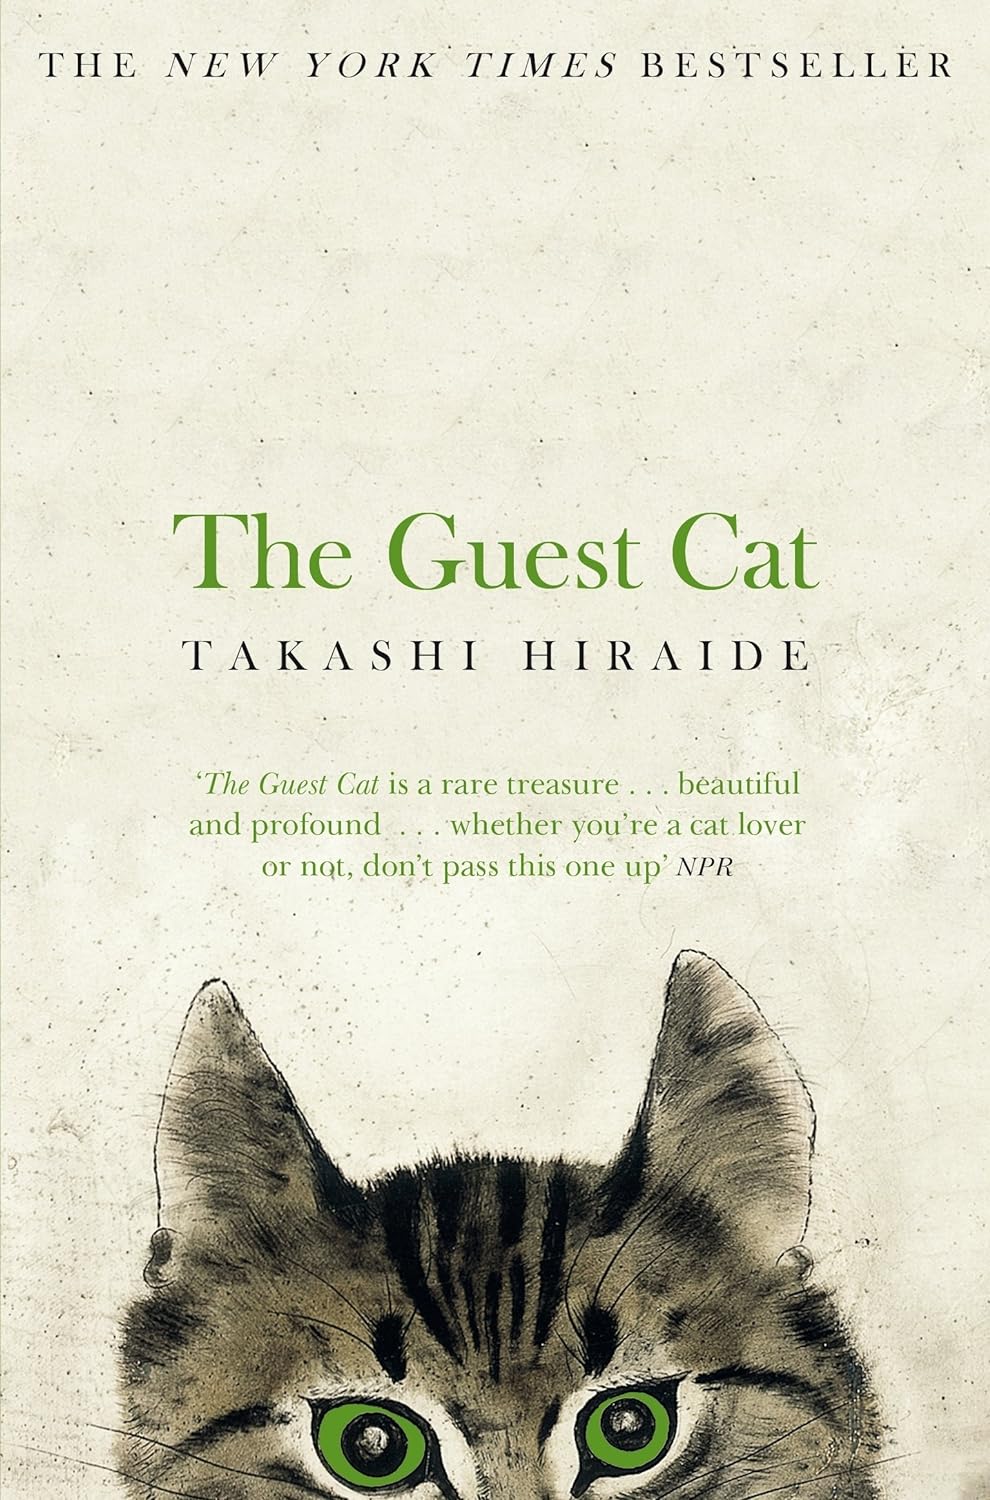 Cover of "The Guest Cat" by Takashi Hiraide